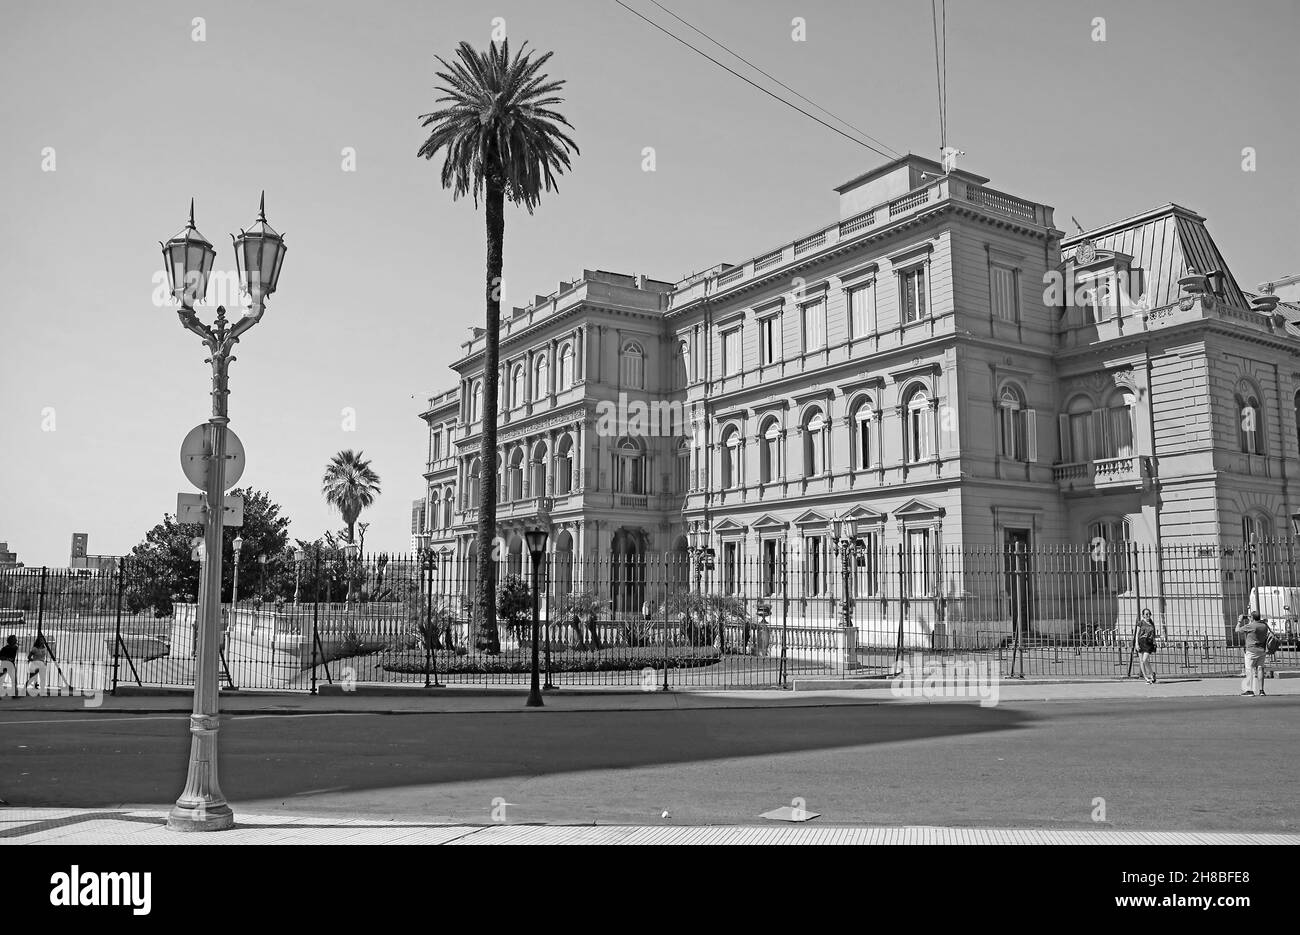 Monochrome Image of Casa Rosada Presidential Palace, an Iconic Landmark on Plaza de Mayo Square in Buenos Aires, Argentina Stock Photo